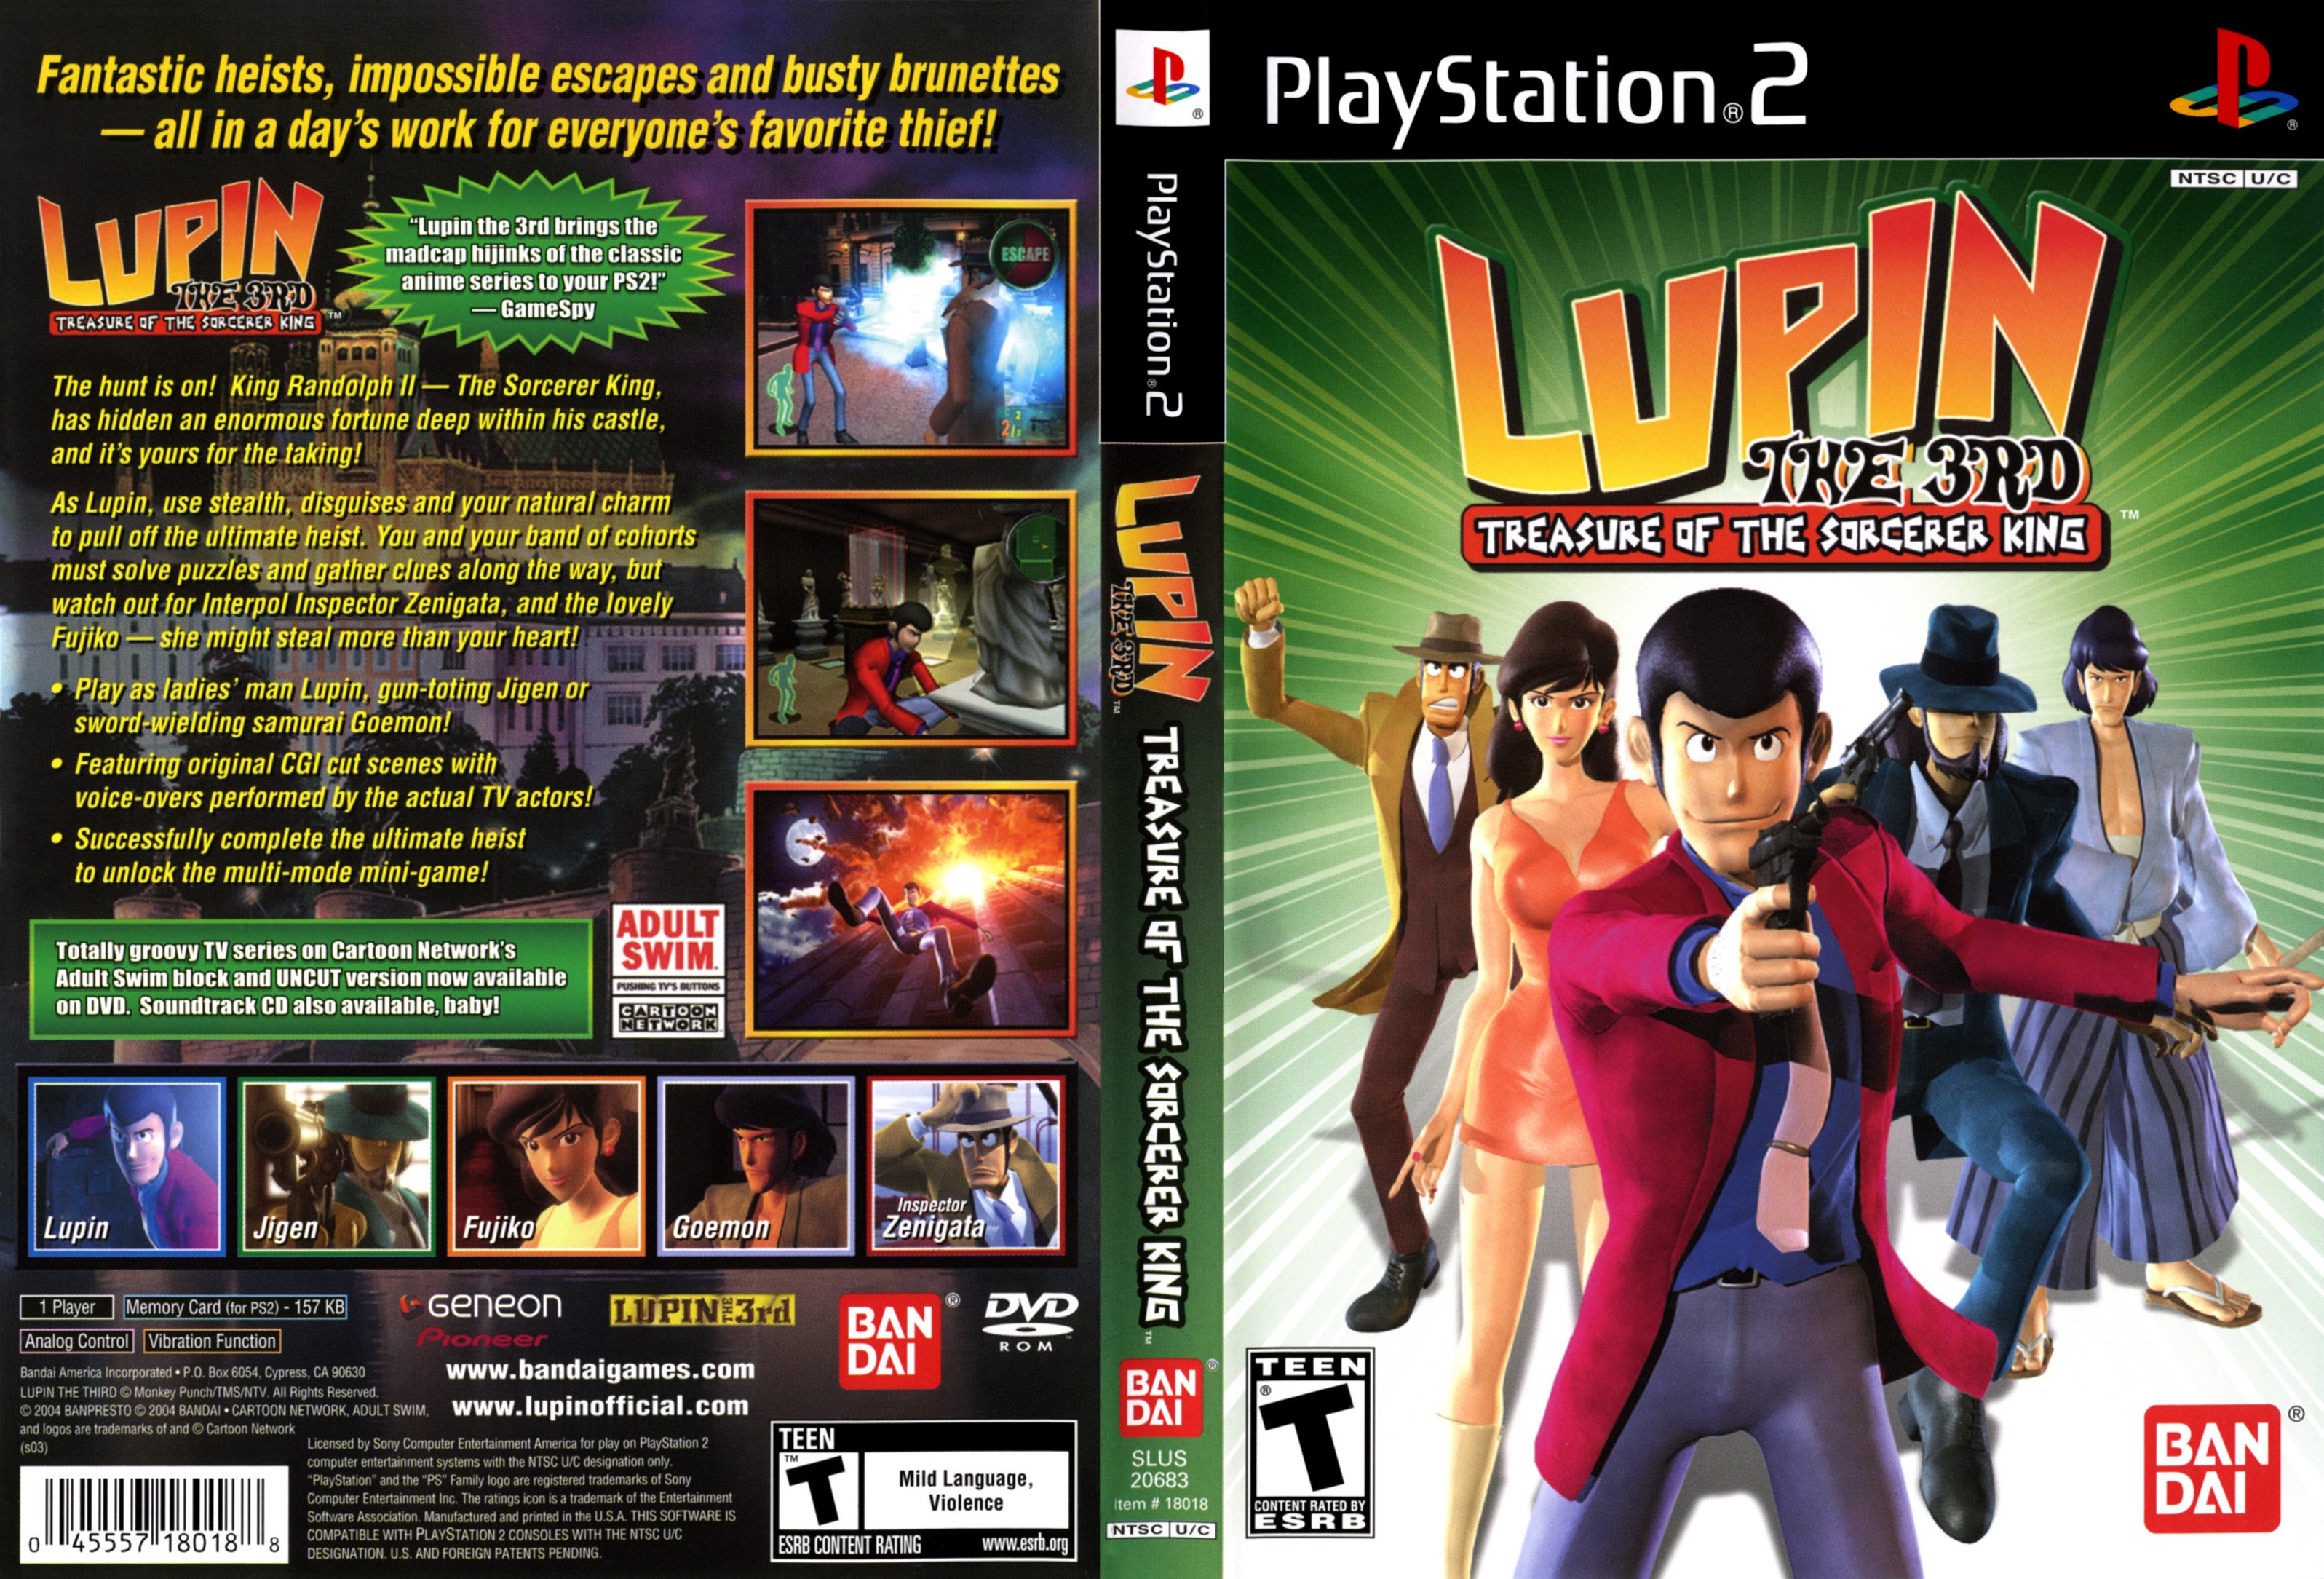 Lupin The 3rd Treasure Of The Sorcerer King COVER